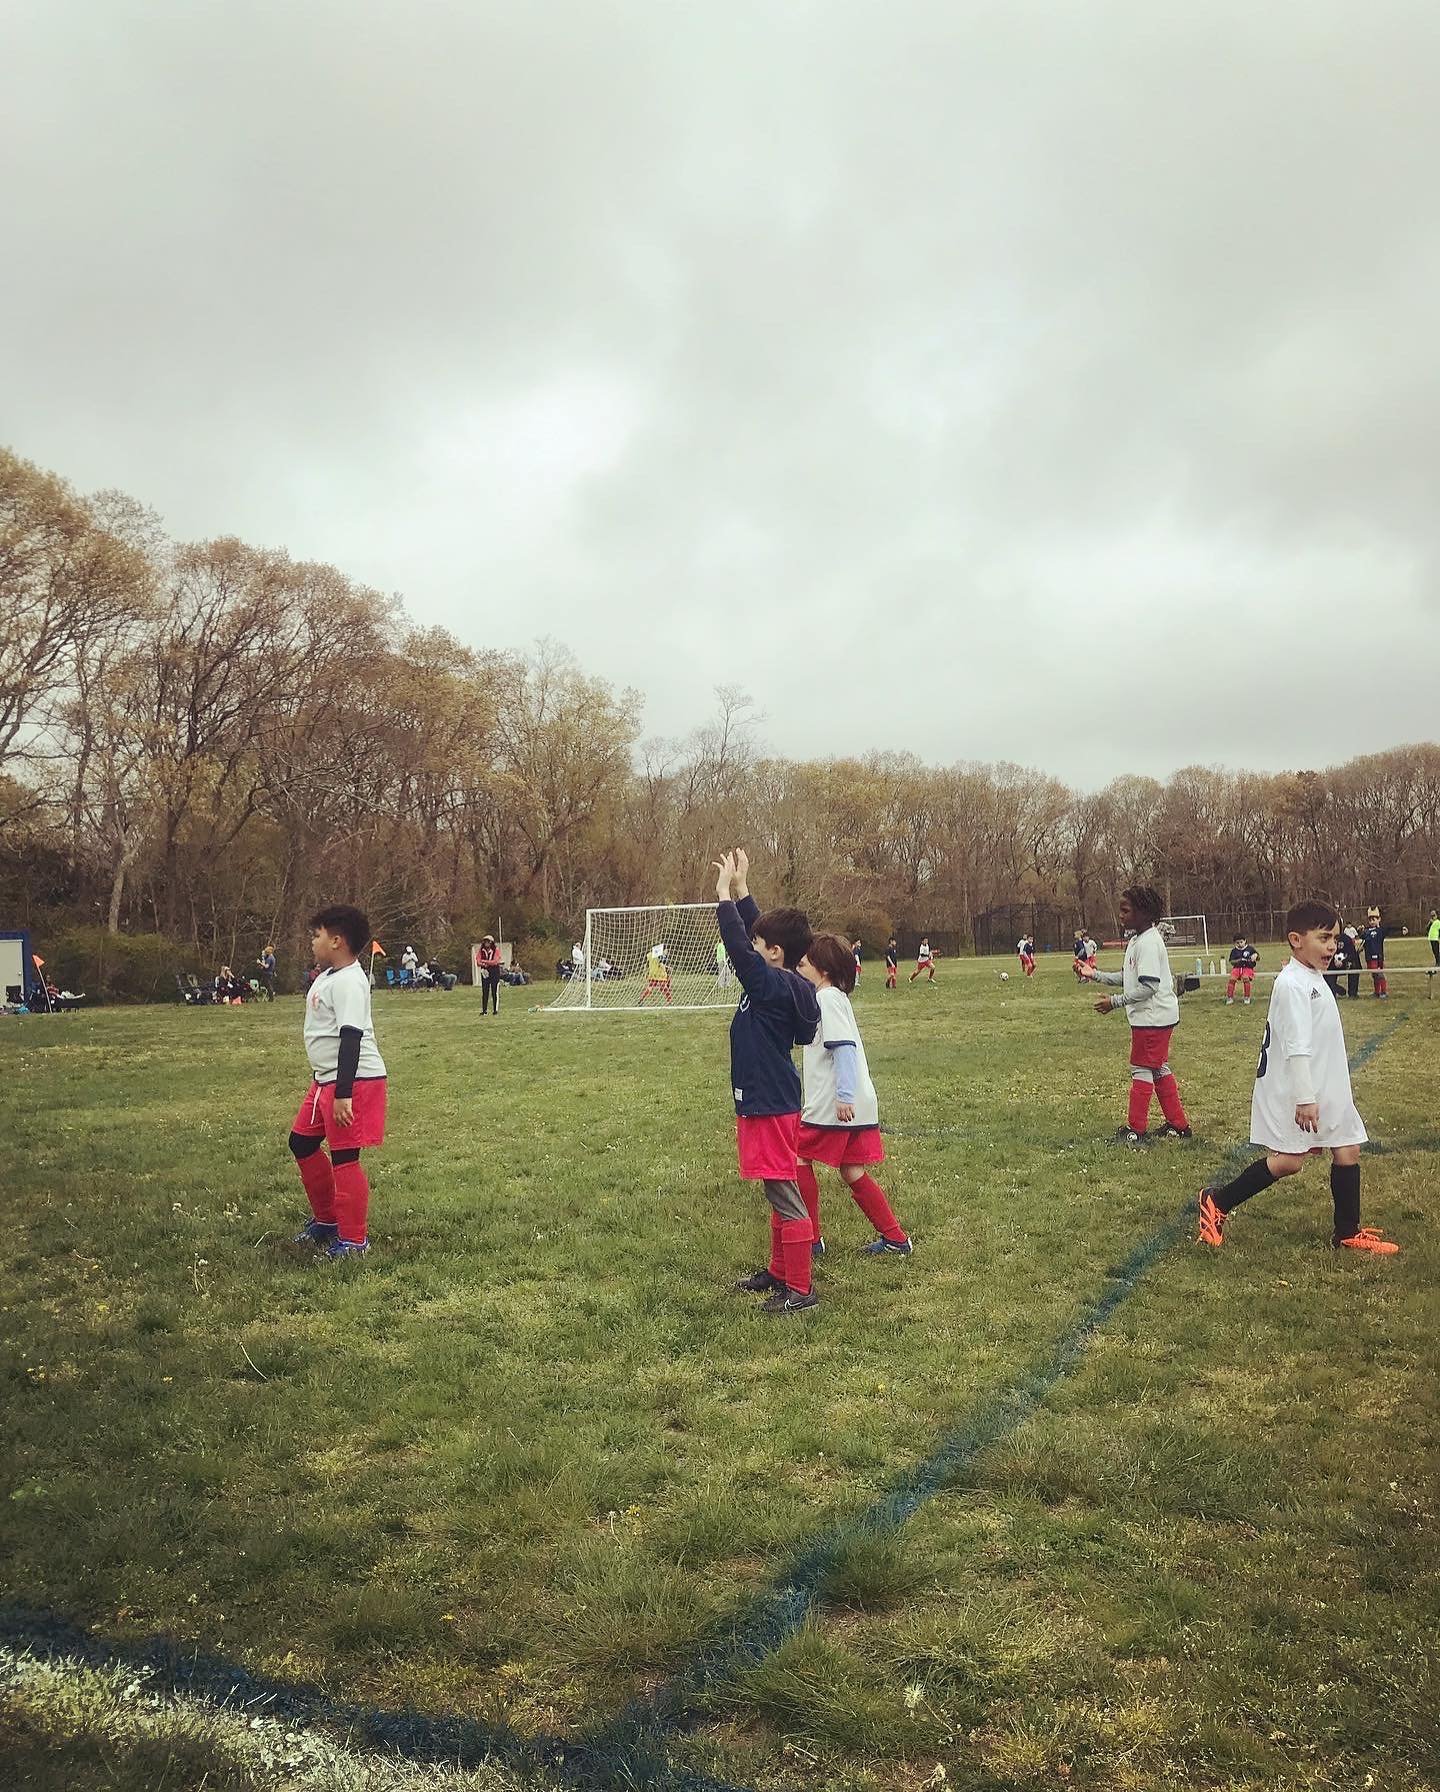 Soccer Sunday with @bellport_soccer ⚽️ Elliot&rsquo;s team had a tough game but hopefully it will push them to do better next time. We&rsquo;re always cheering on the sidelines. Go Cardinals! #soccer #sports #goteam #bellportsoccer